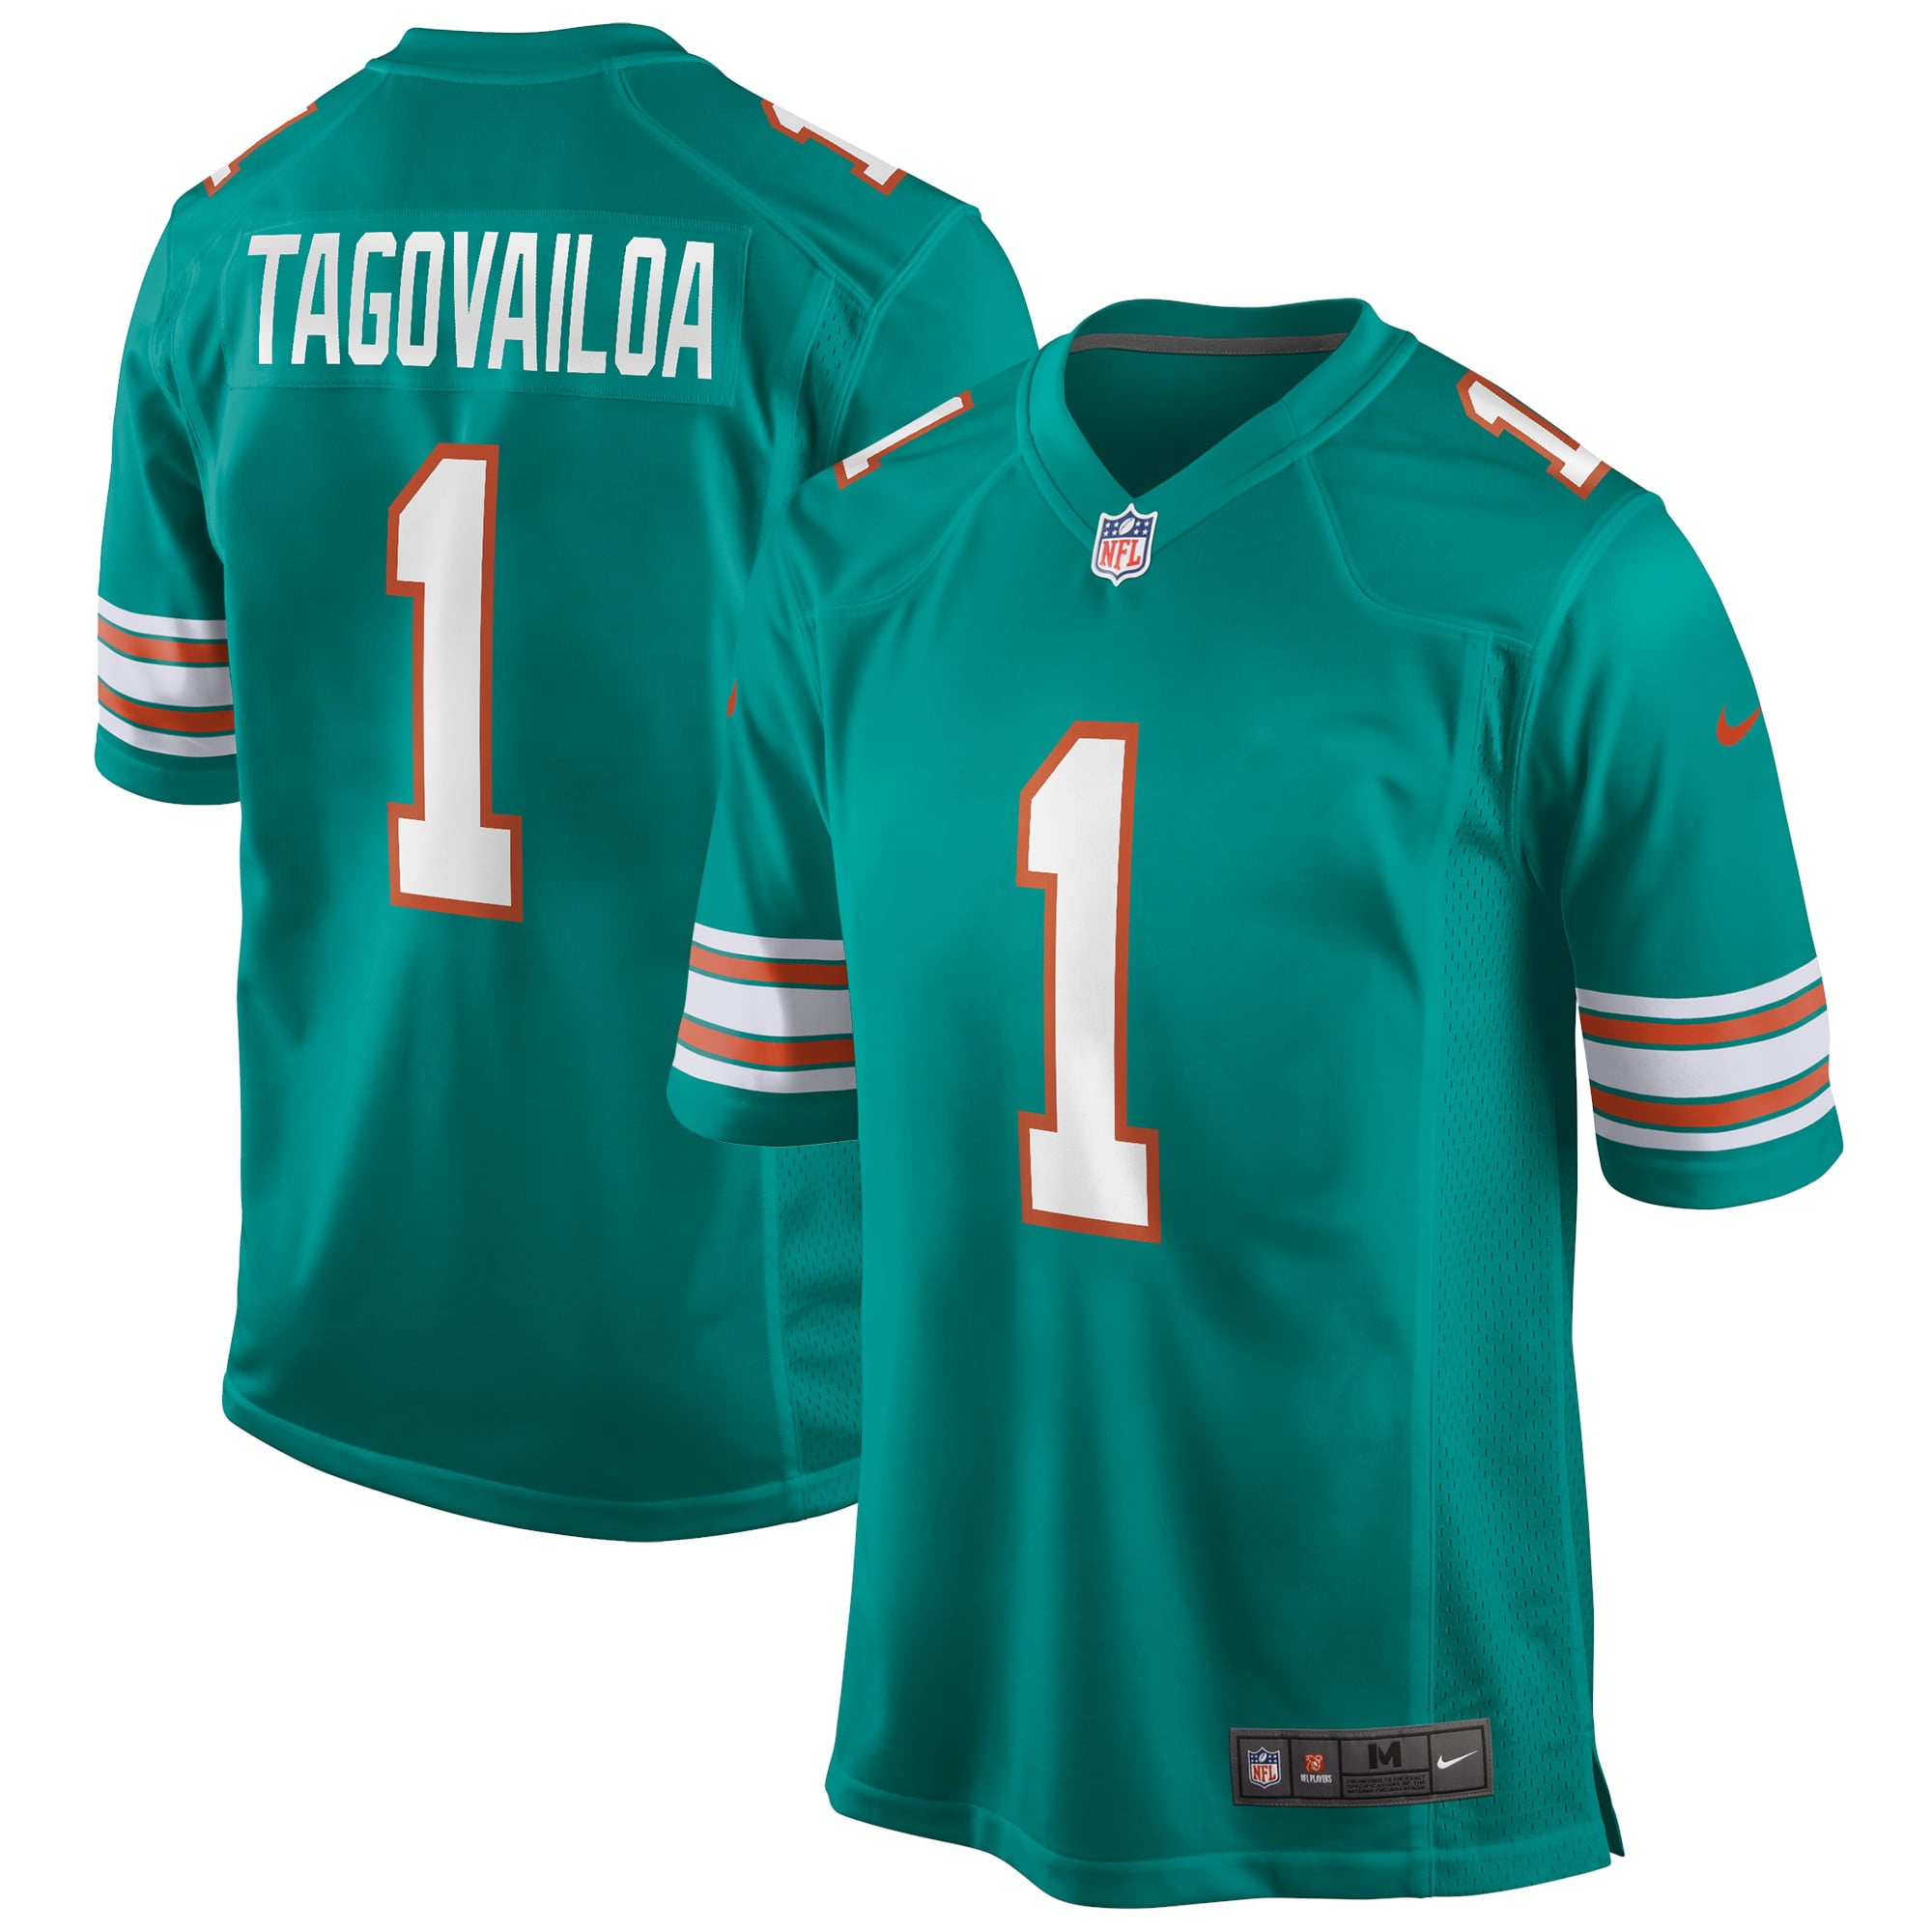 dolphins nike jersey